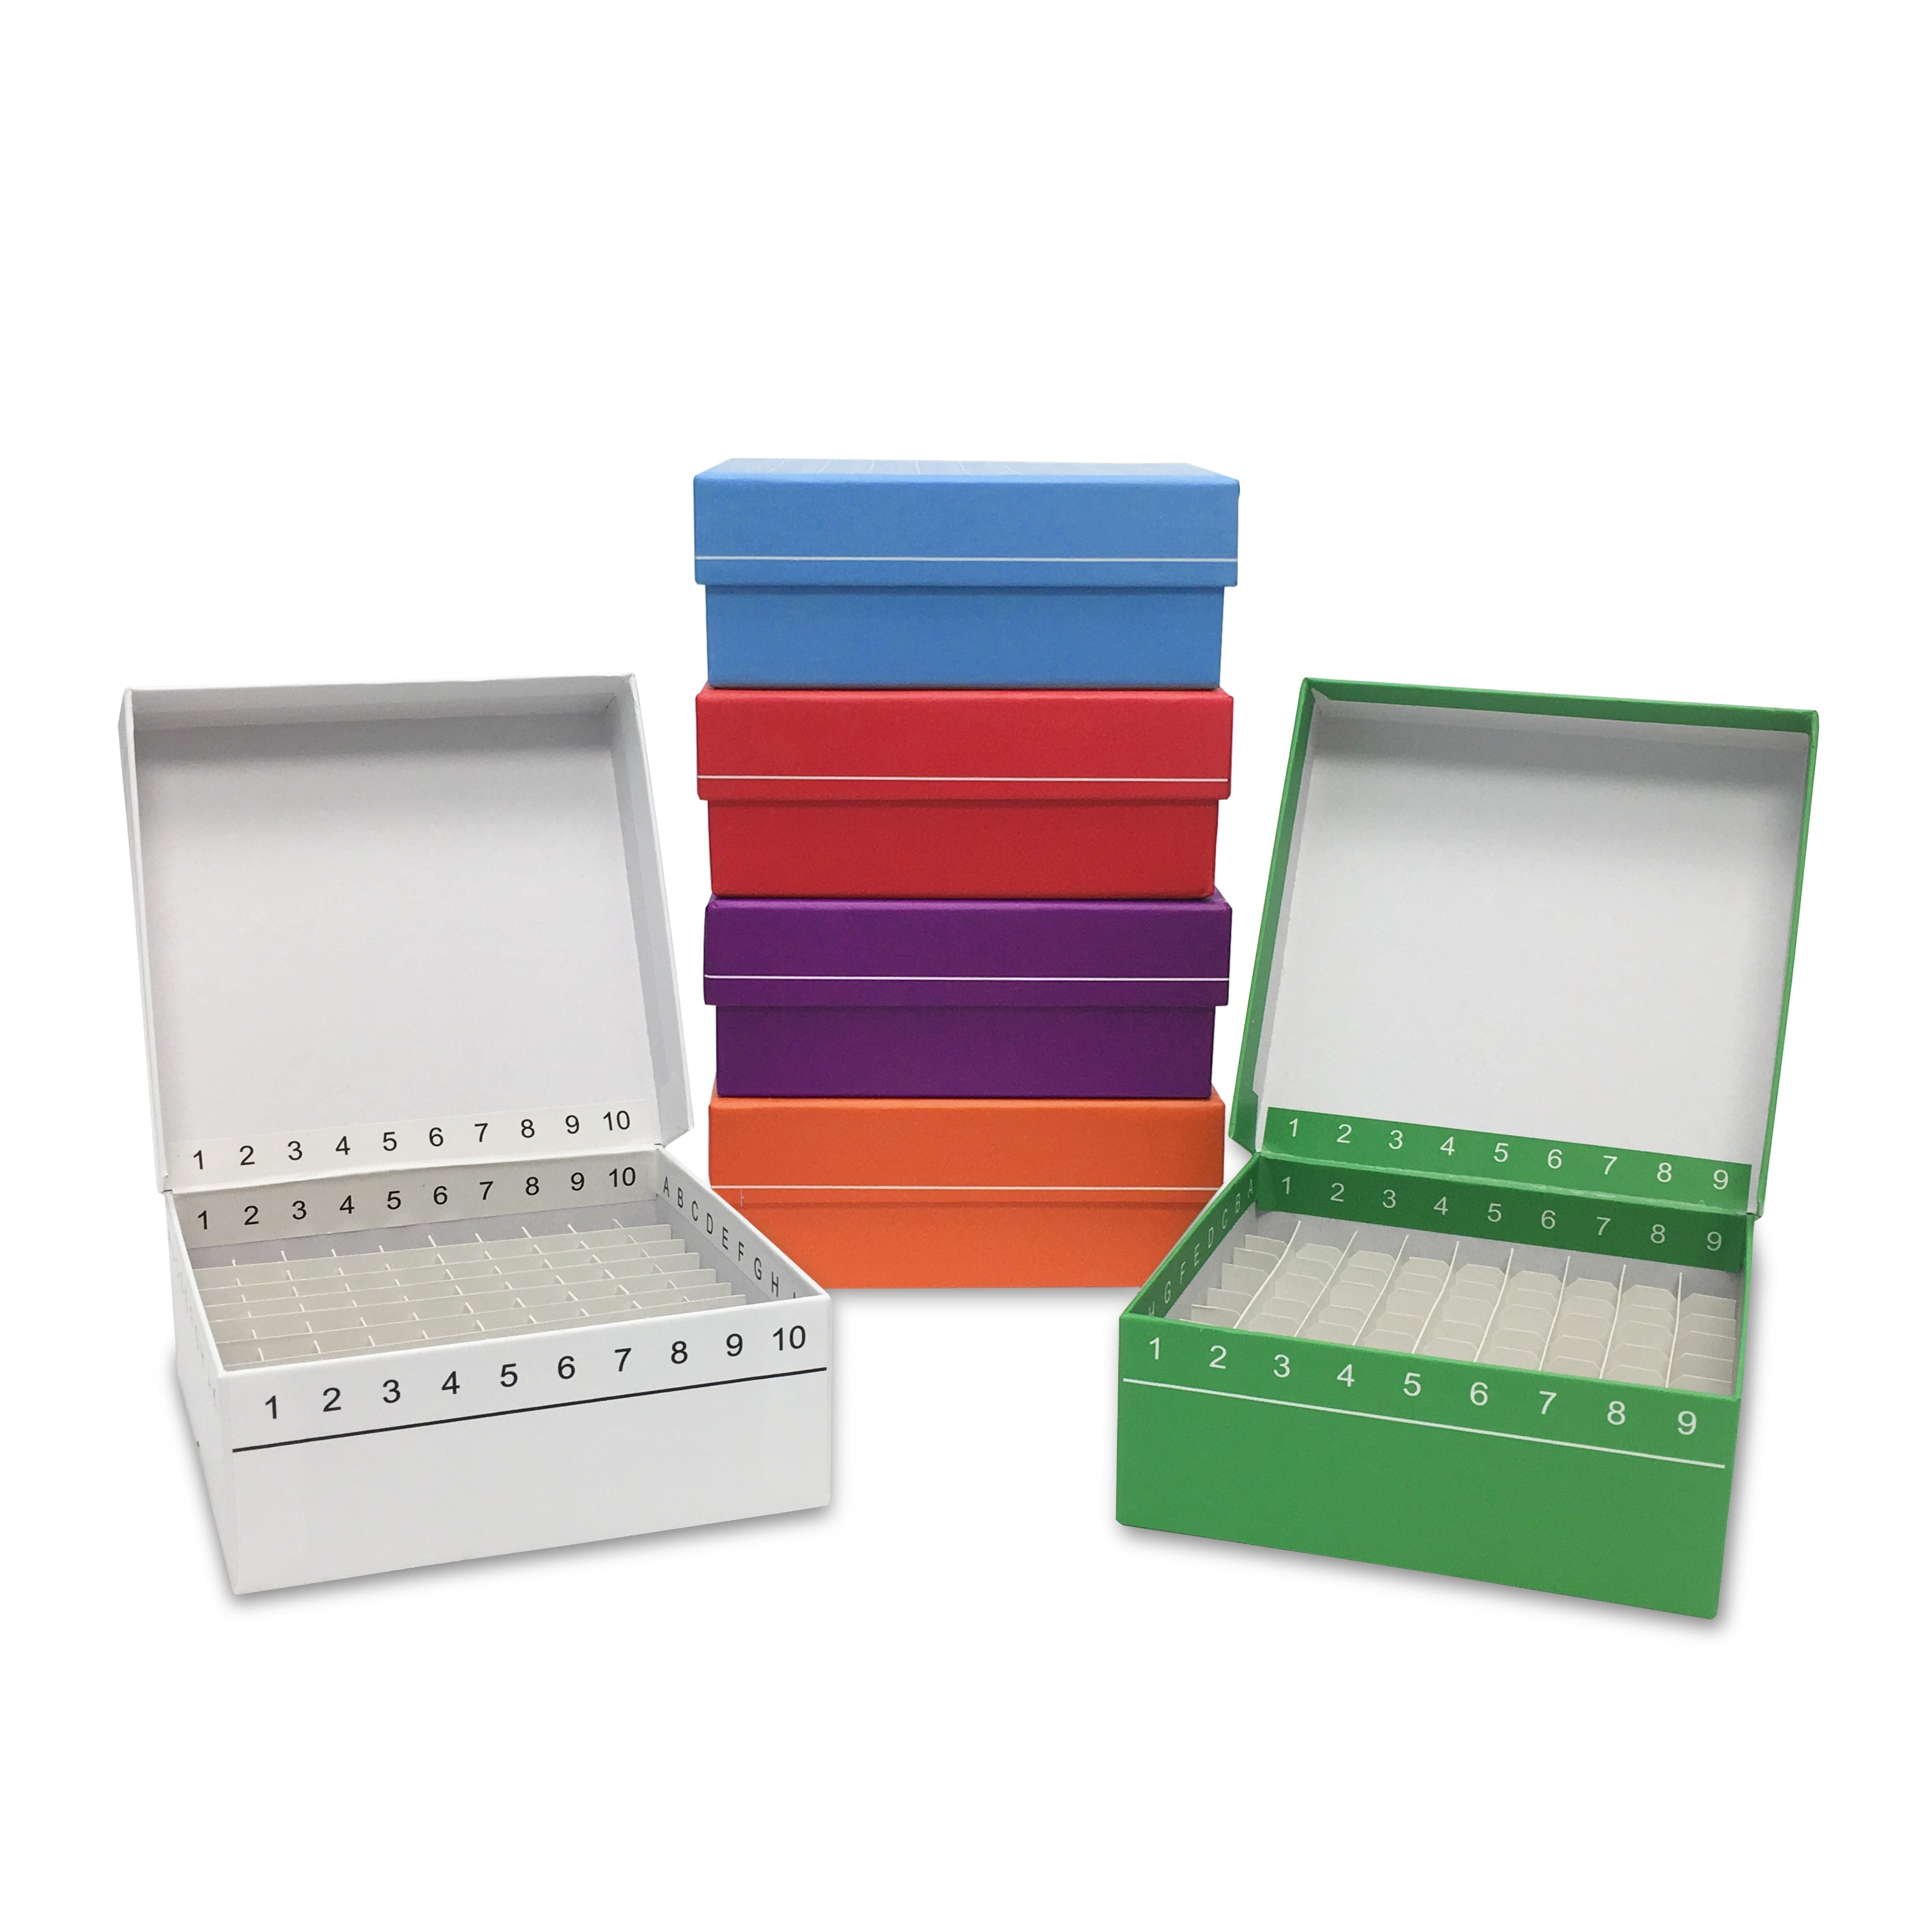 MTC Bio R2781 FlipTop™ Carboard freezer box w/ attached hinged lid, 81-place, white, 5/pk